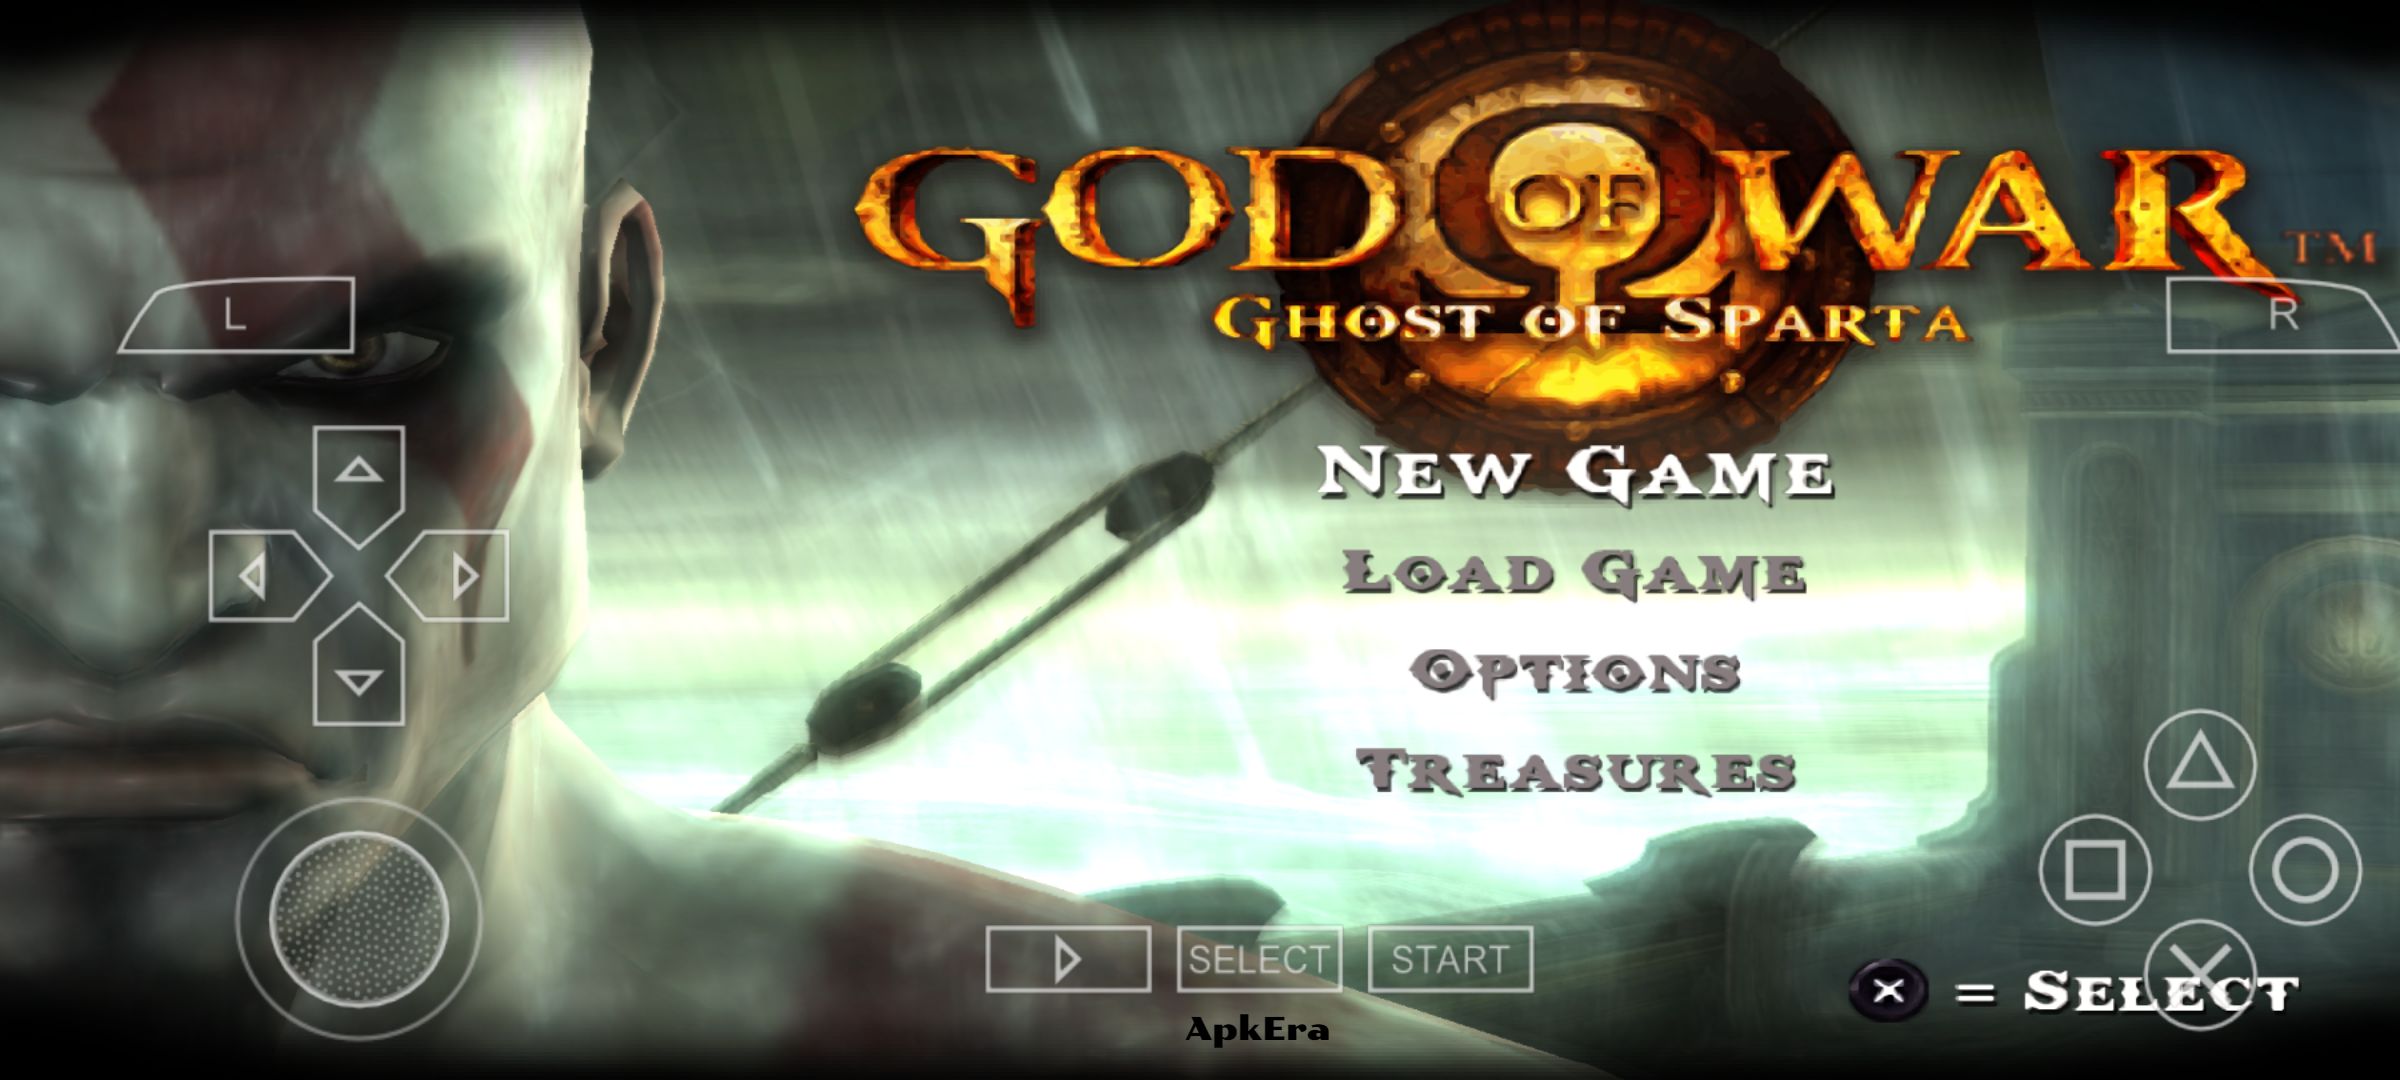 ppsspp god of war ghost of sparta save data